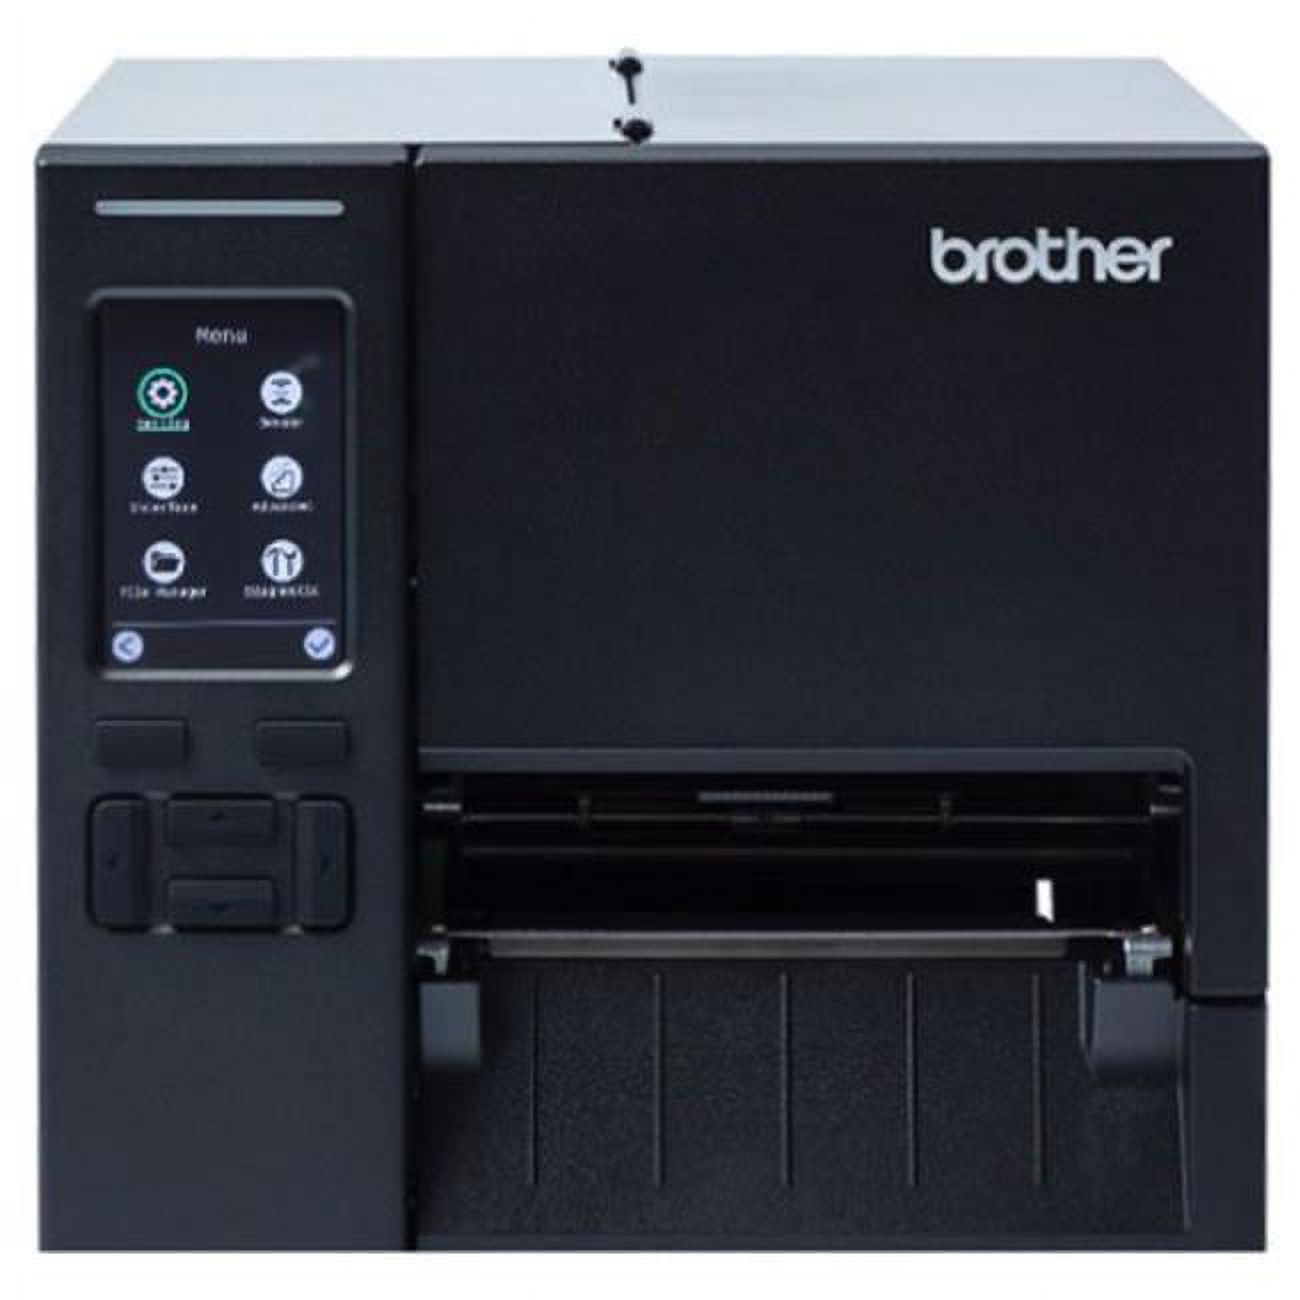 Brother Mobile Solutions TJ4021TNWP 4.7 in. Titan Industrial Printer with Peeler & Rewind, TT - 203DPI, 10 IPS, Color Touch Panel - image 1 of 1